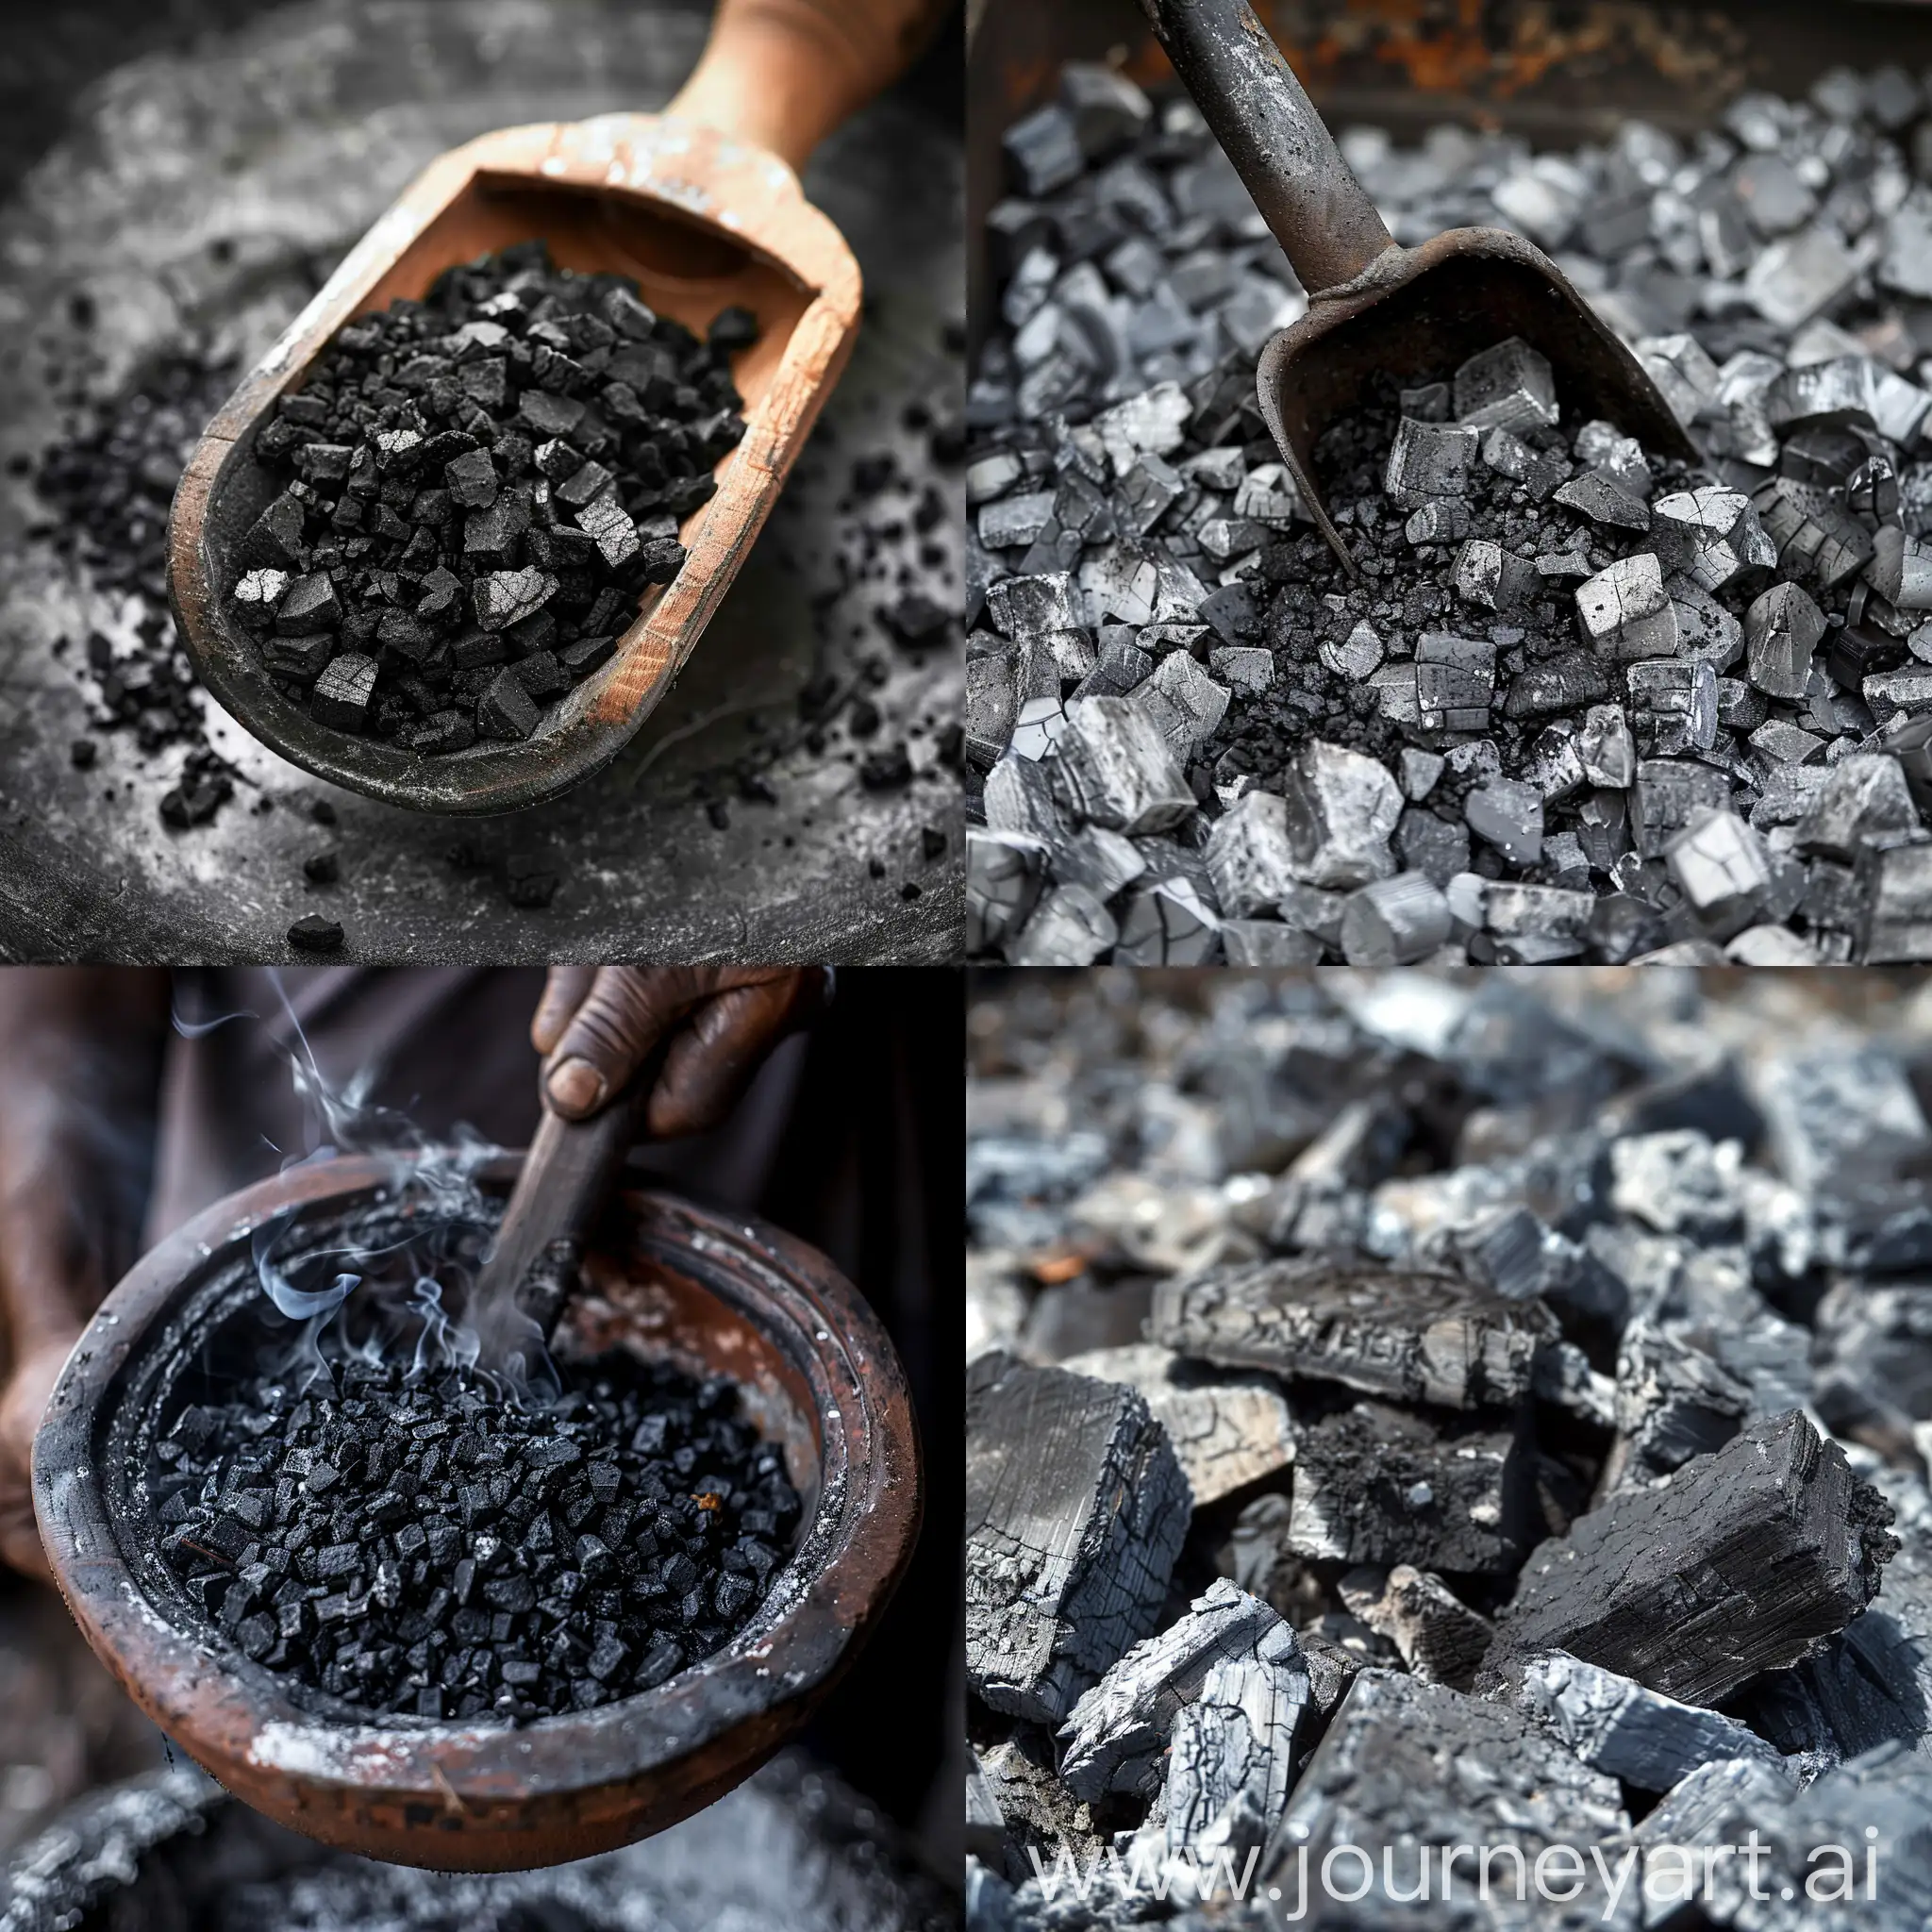 Burning-Coal-with-Fluorine-Contamination-in-Food